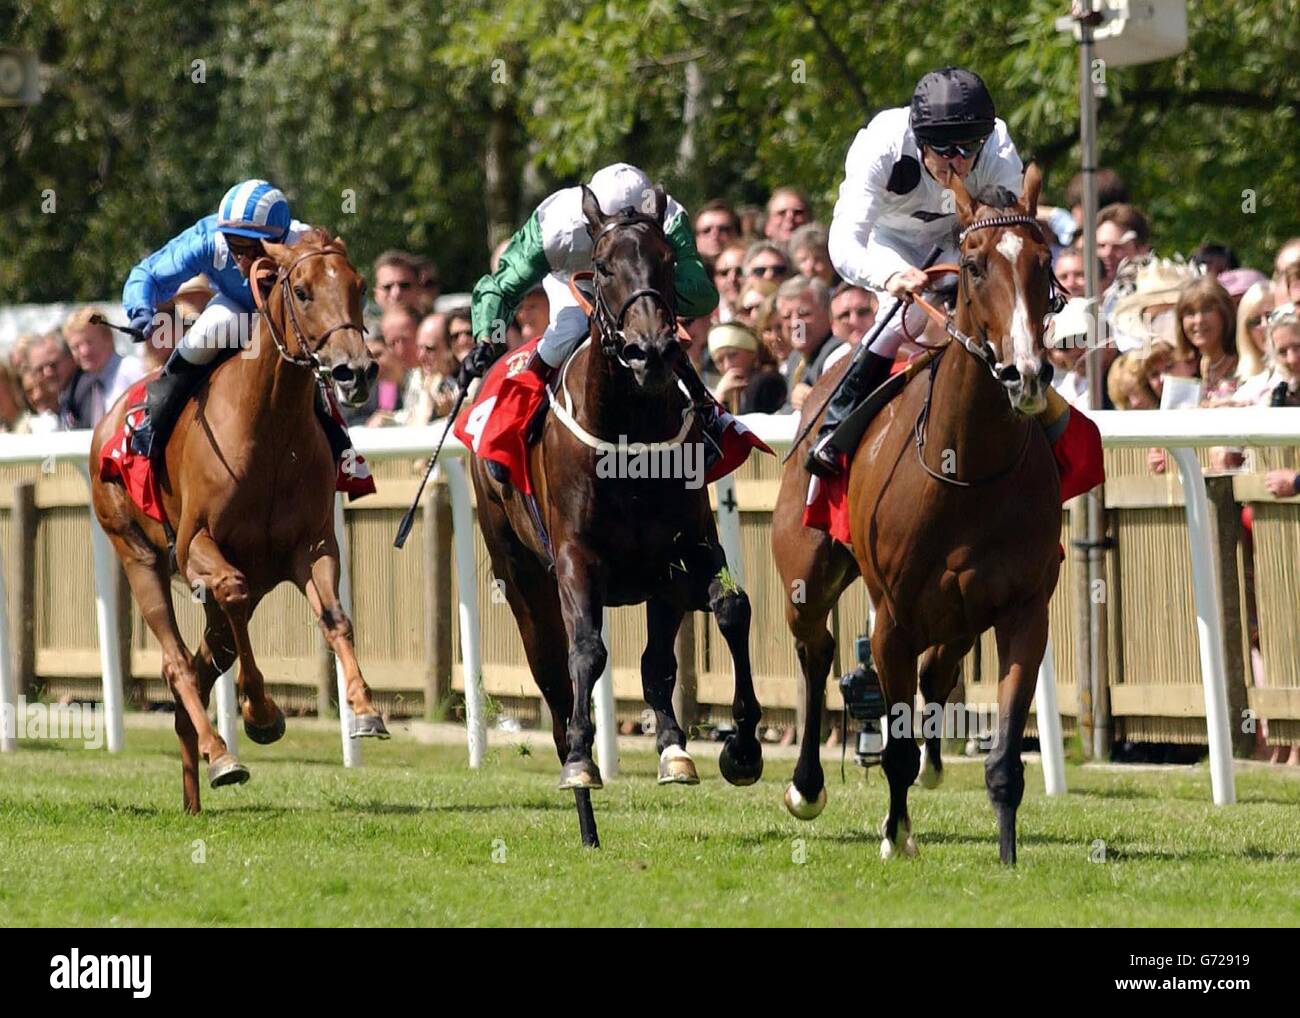 Soviet Song ridden by jockey Johnny Murtagh (right) leads home second placed Attraction ridden by Kevin Darley and third placed Baqah ridden by Davy Bonilla (left) in the 2.55 at Newmarket. Stock Photo